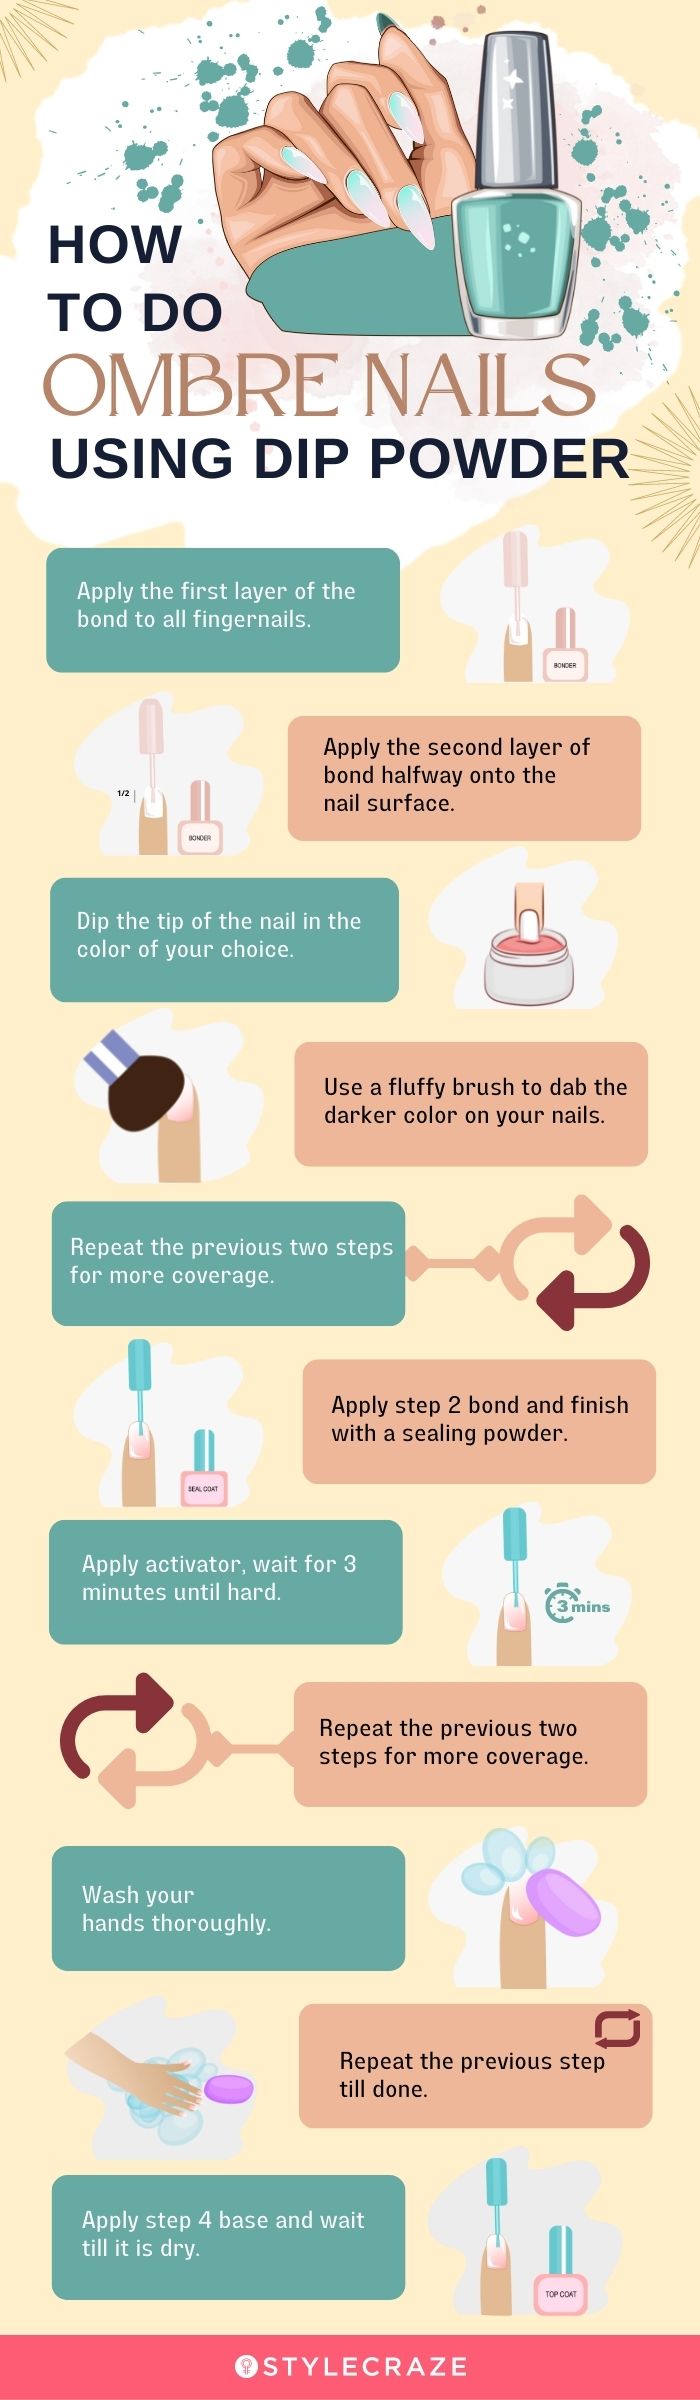 how to do ombre nails using dip powder [infographic]